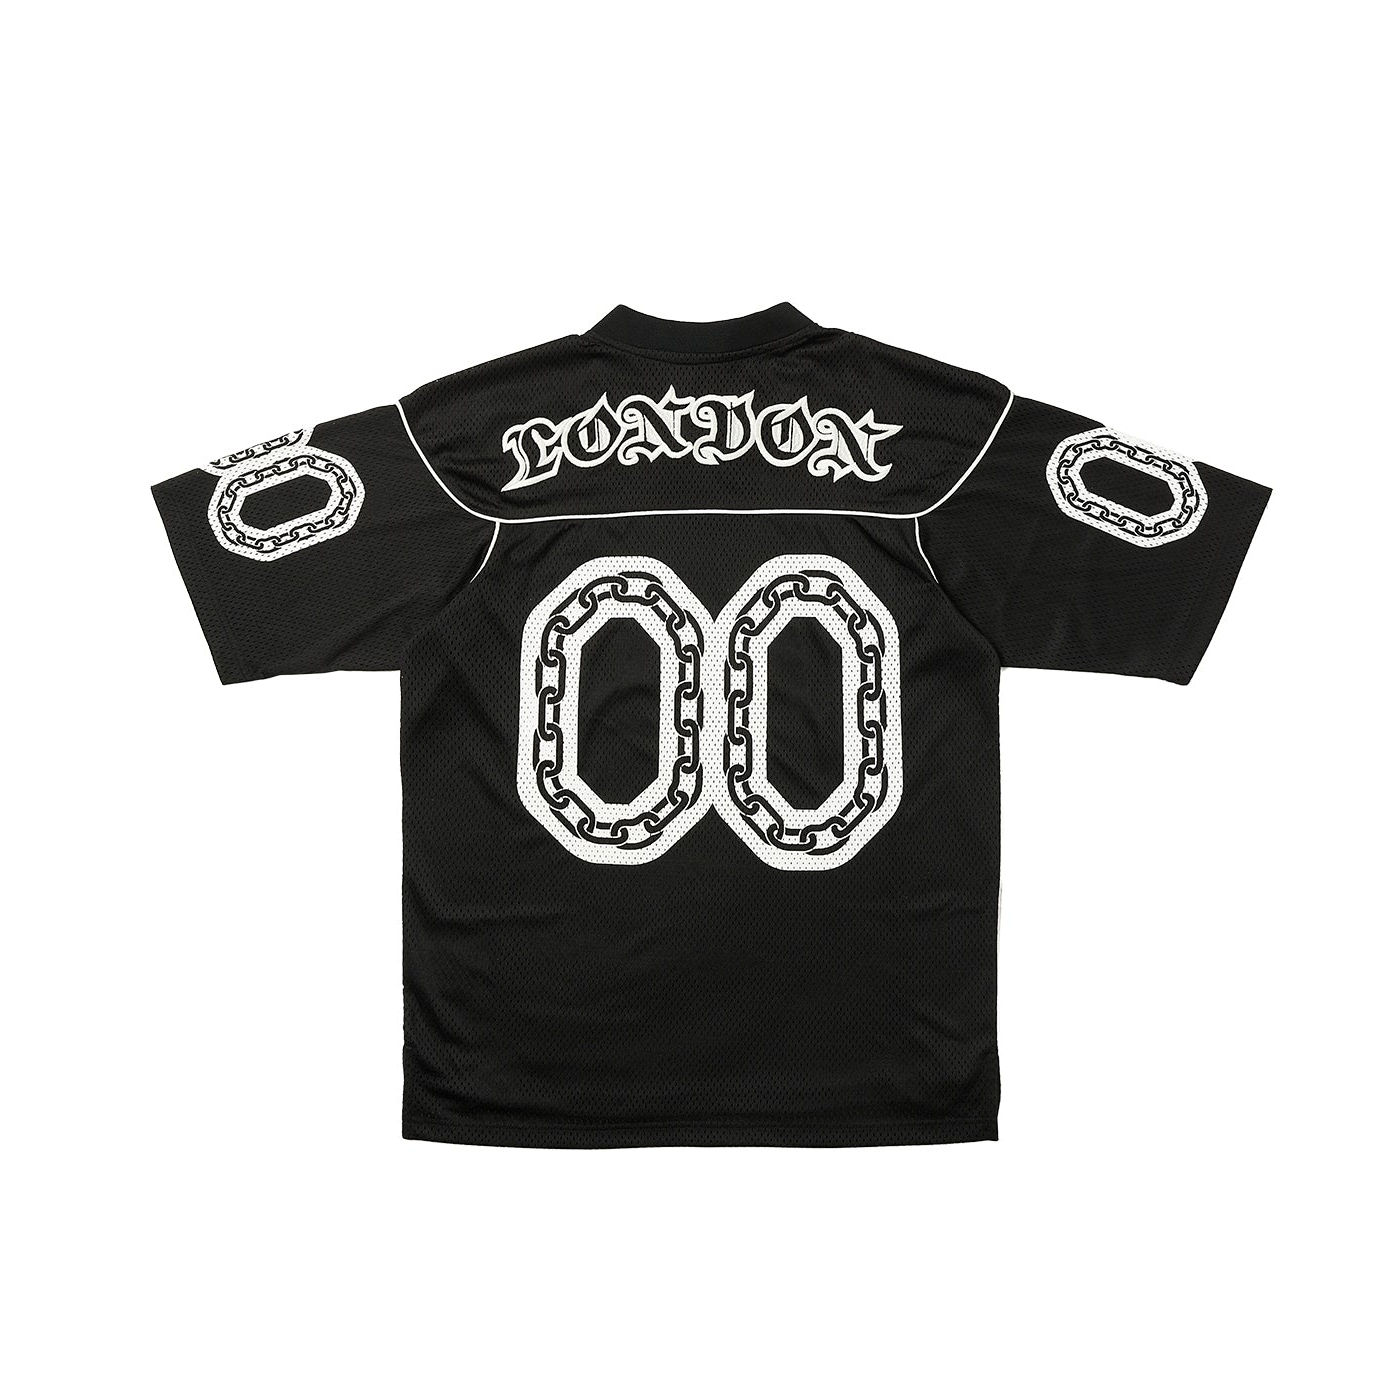 Thumbnail HESH ATHLETIC JERSEY BLACK one color